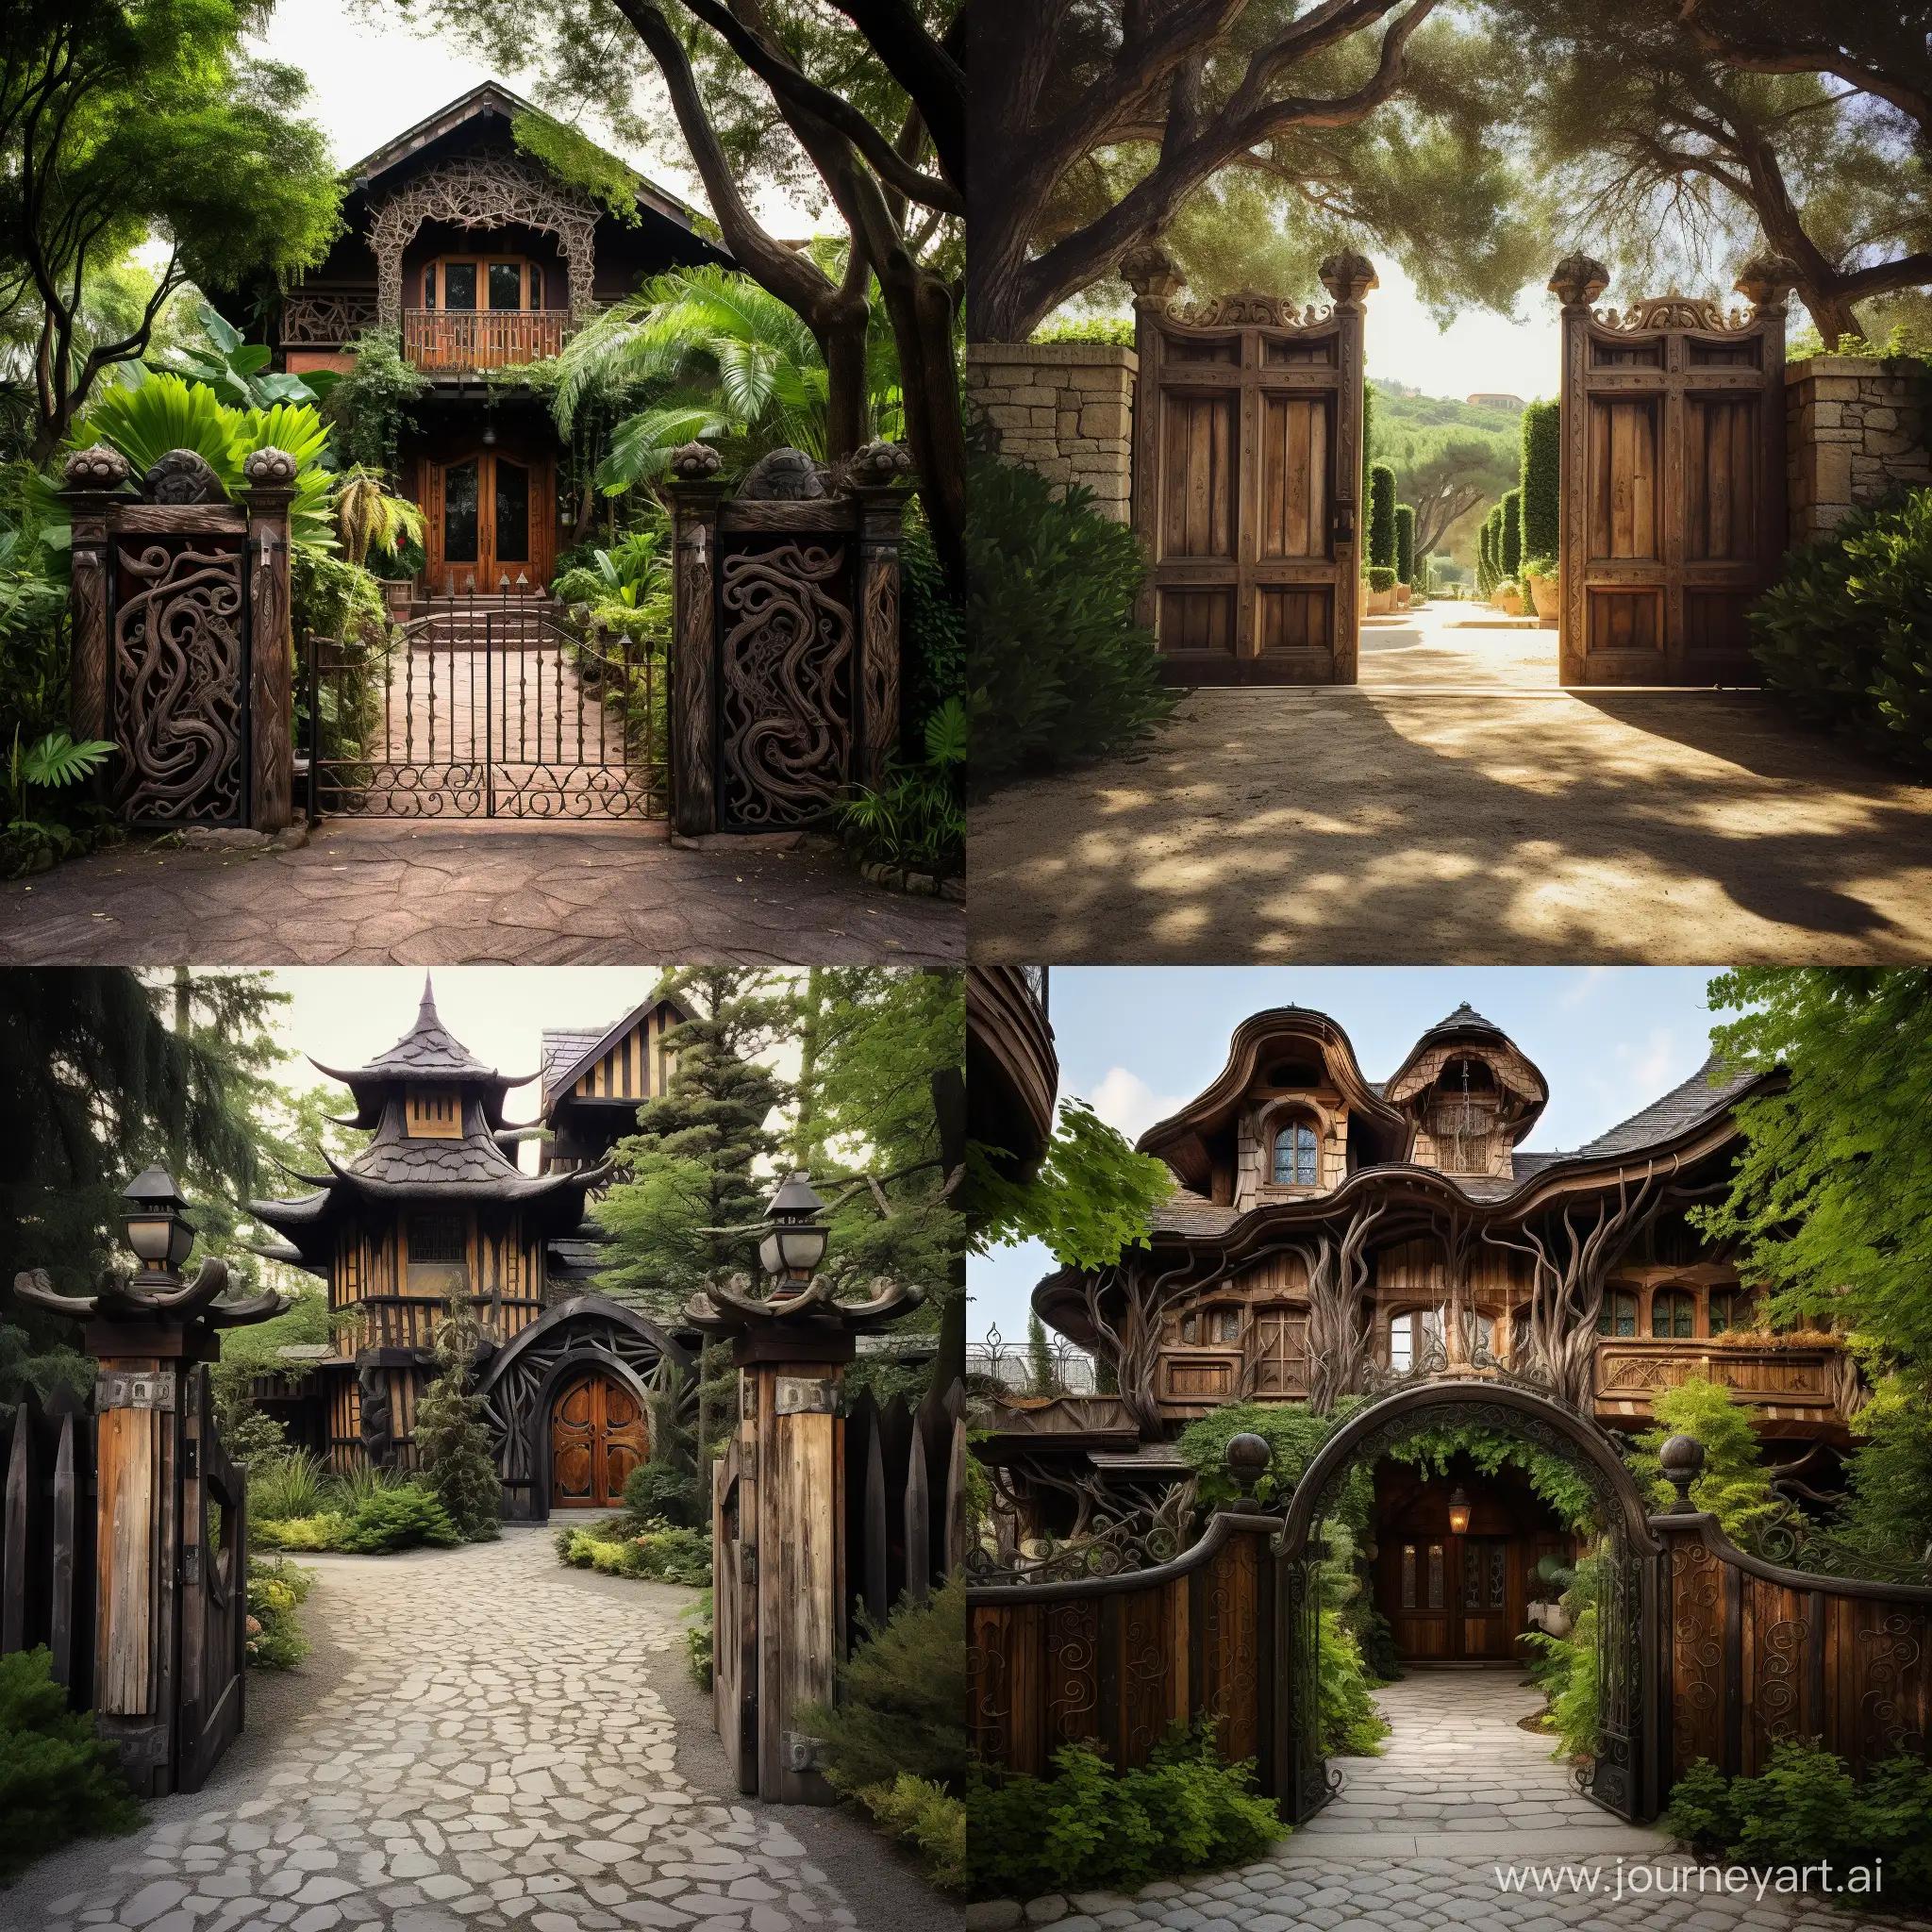 Rustic-Villa-Gate-with-Closed-Wooden-Surroundings-Tranquil-Welcome